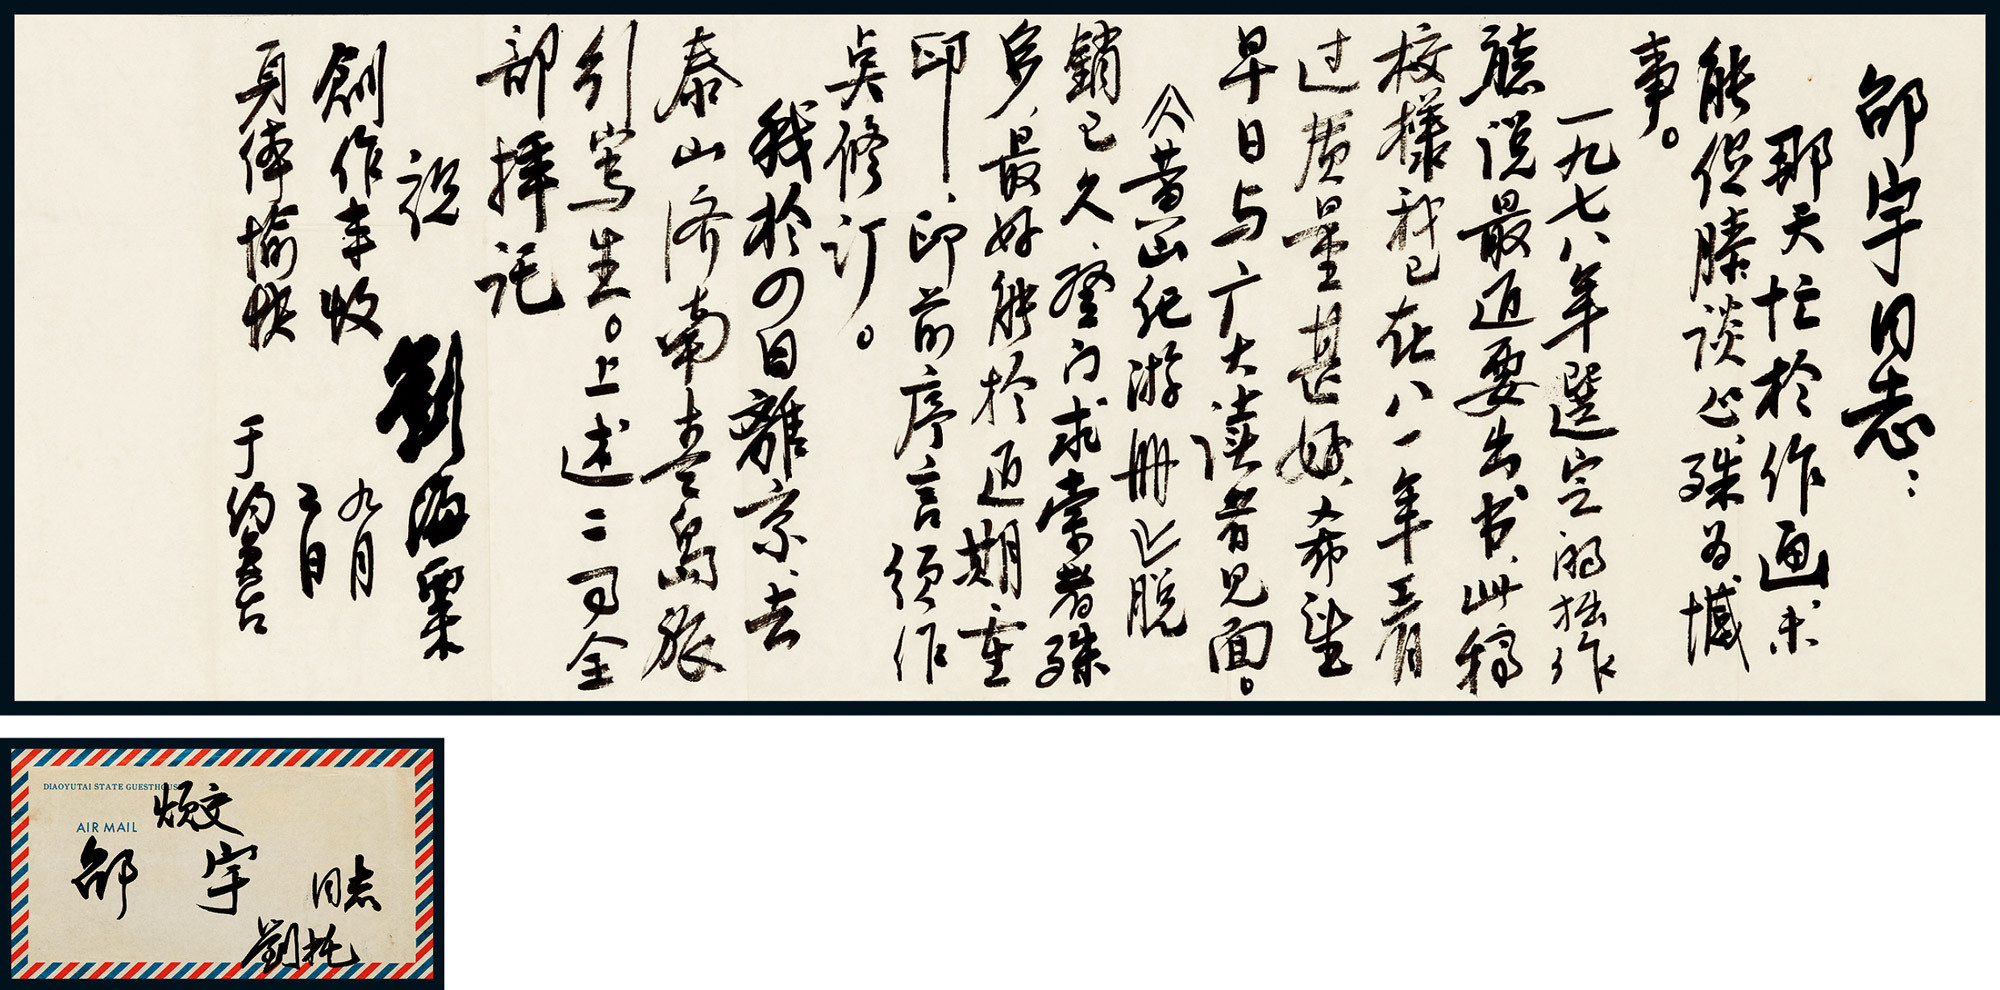 A letter from Liu Haili to Shao Yu with a hand-delivered envelope